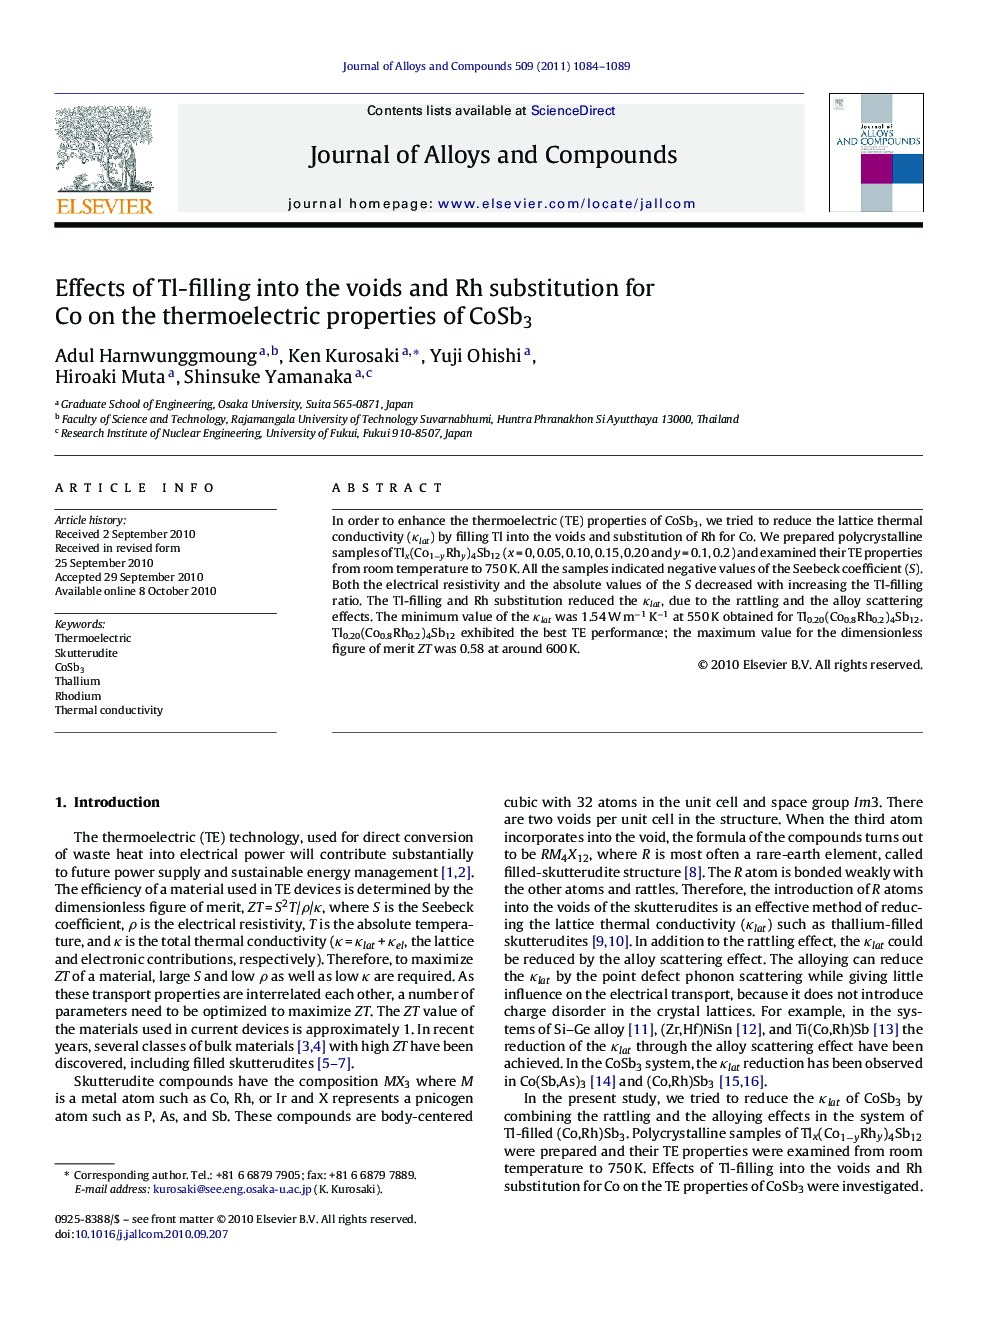 Effects of Tl-filling into the voids and Rh substitution for Co on the thermoelectric properties of CoSb3